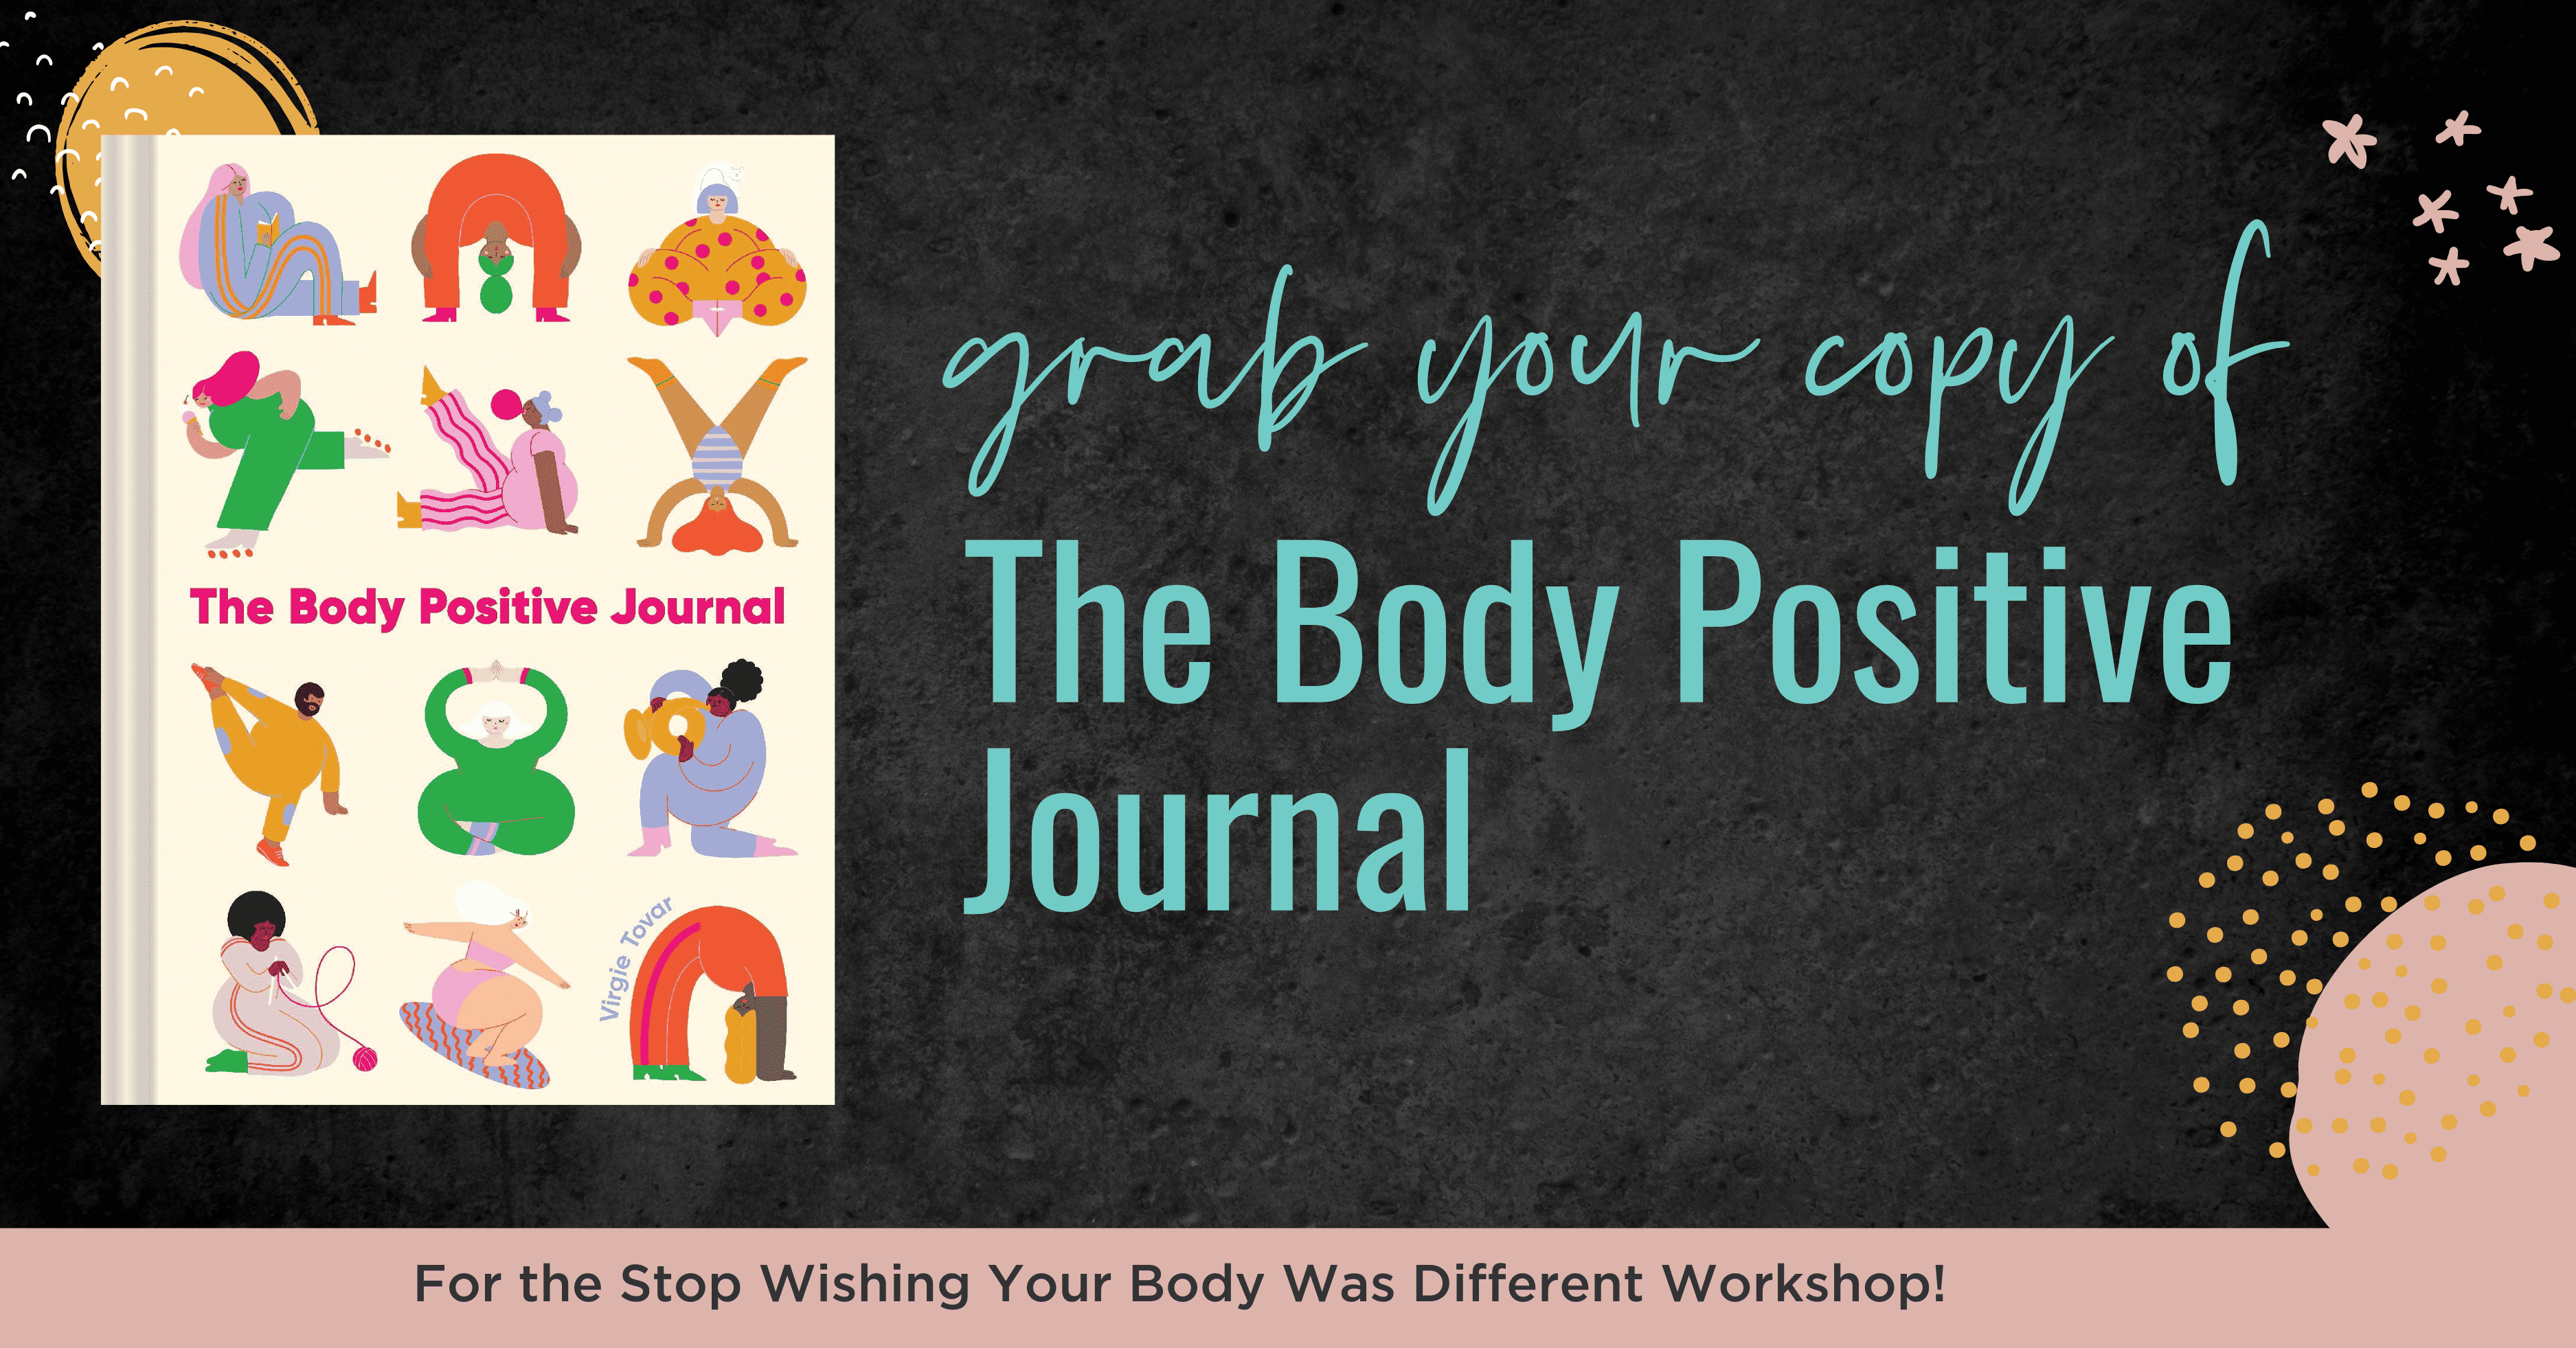 Stop Wishing Your Body Workshop - Body Positive Journal